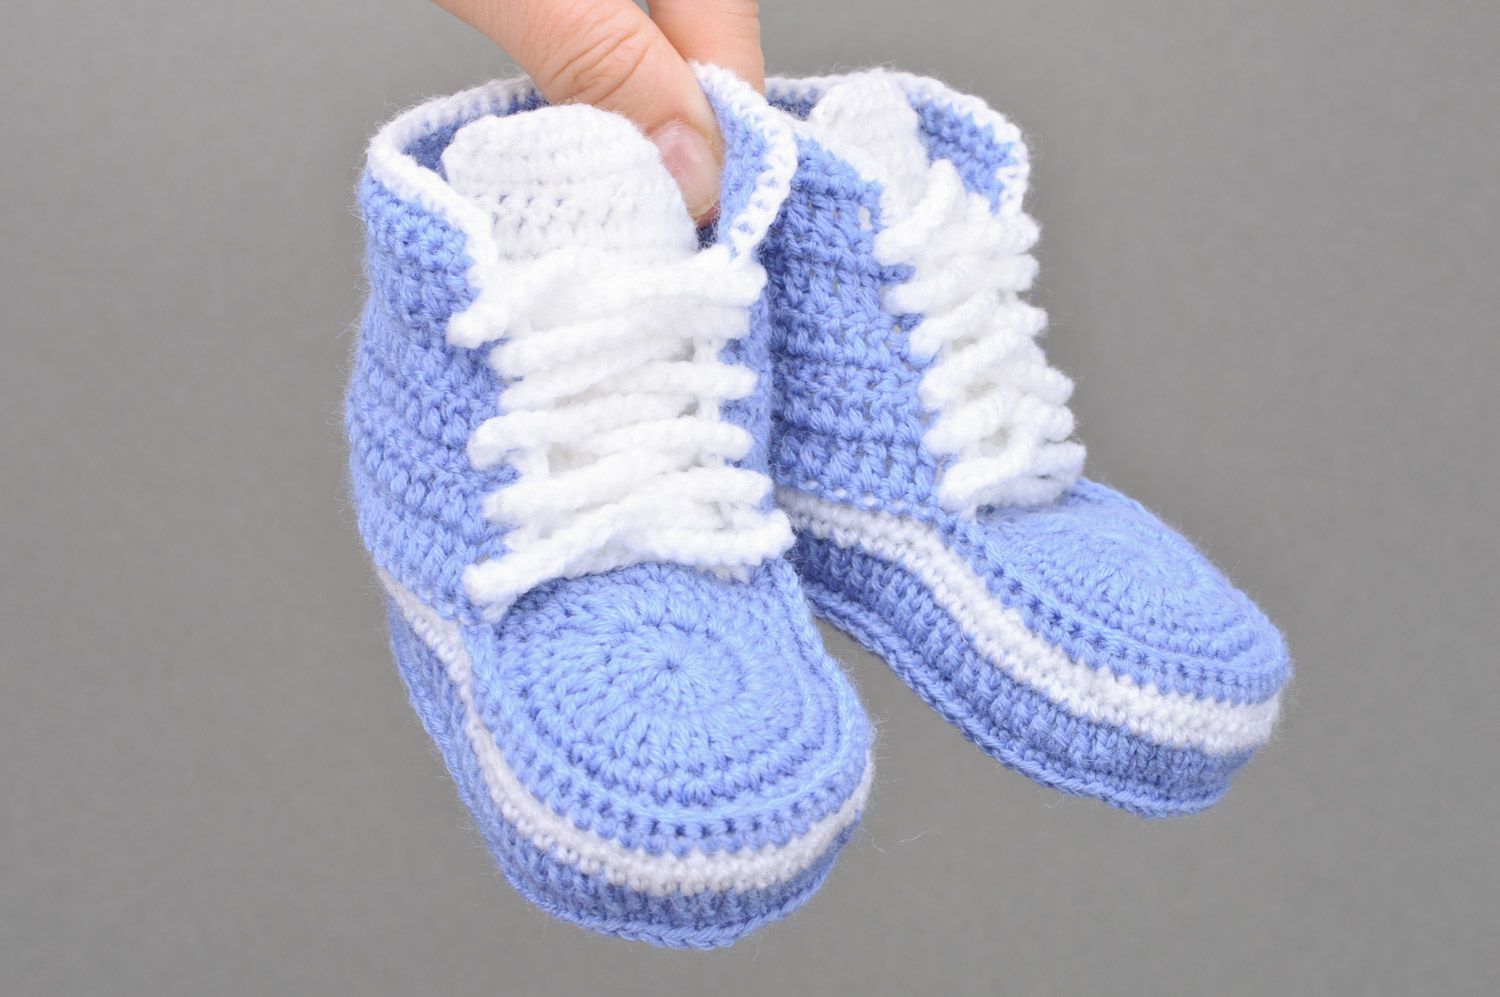 Handmade small crocheted blue baby sneakers with white shoelaces  photo 3